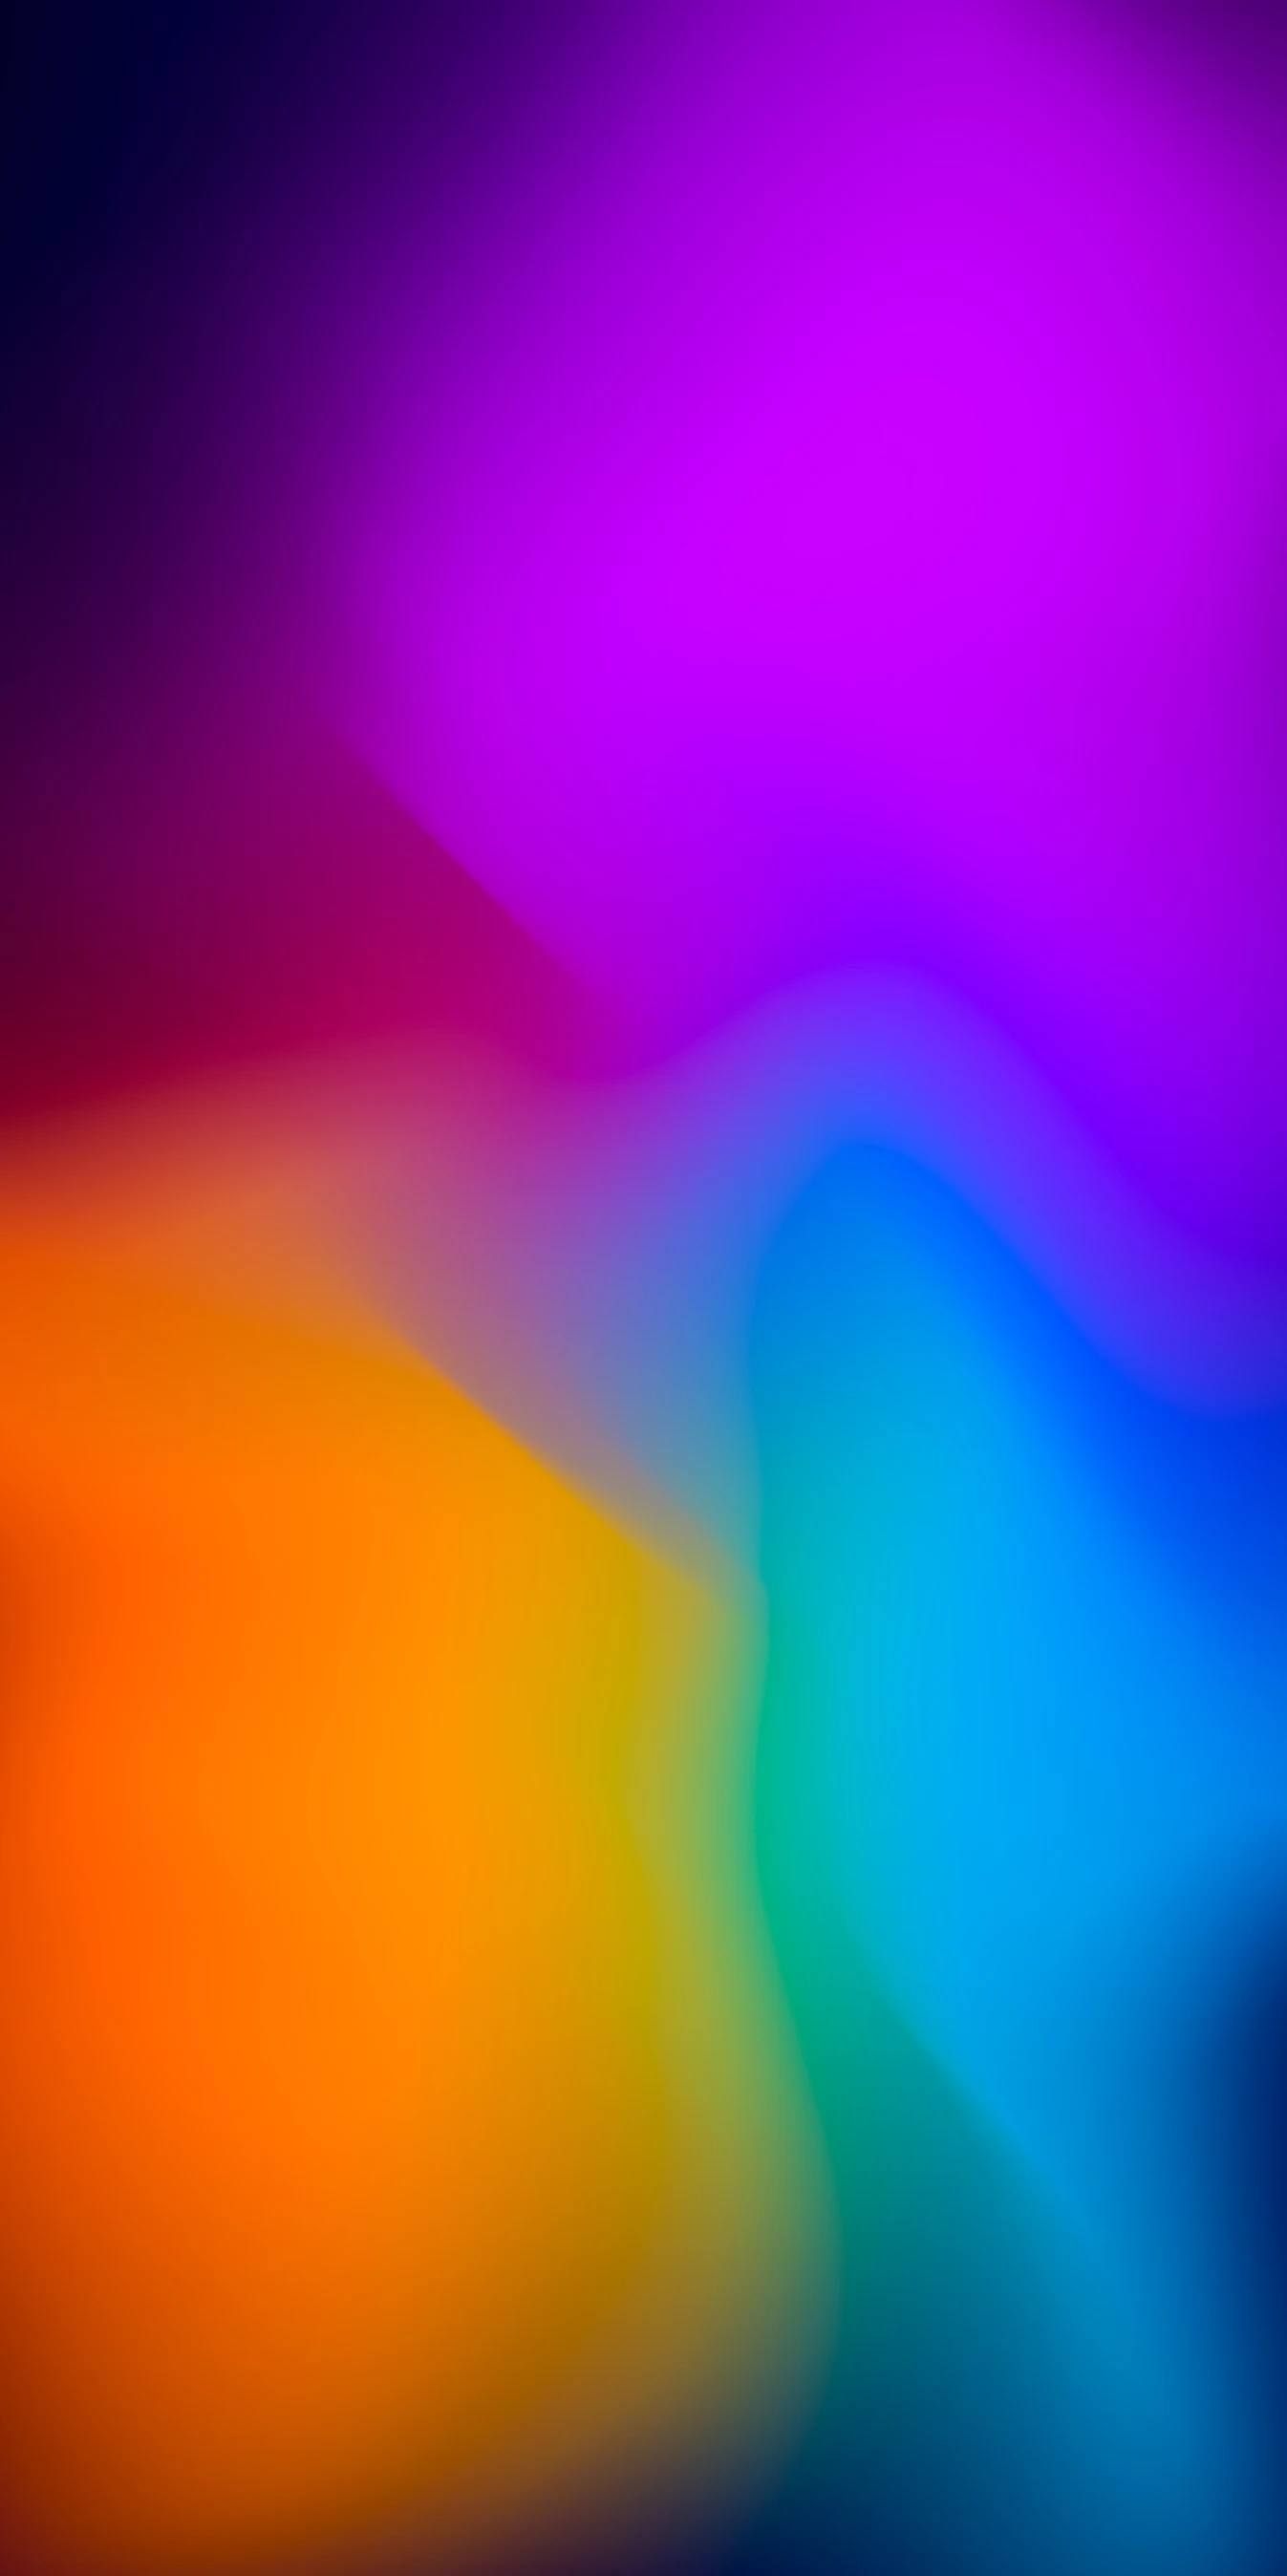 Colorful iPhone wallpaper for free HD - 07